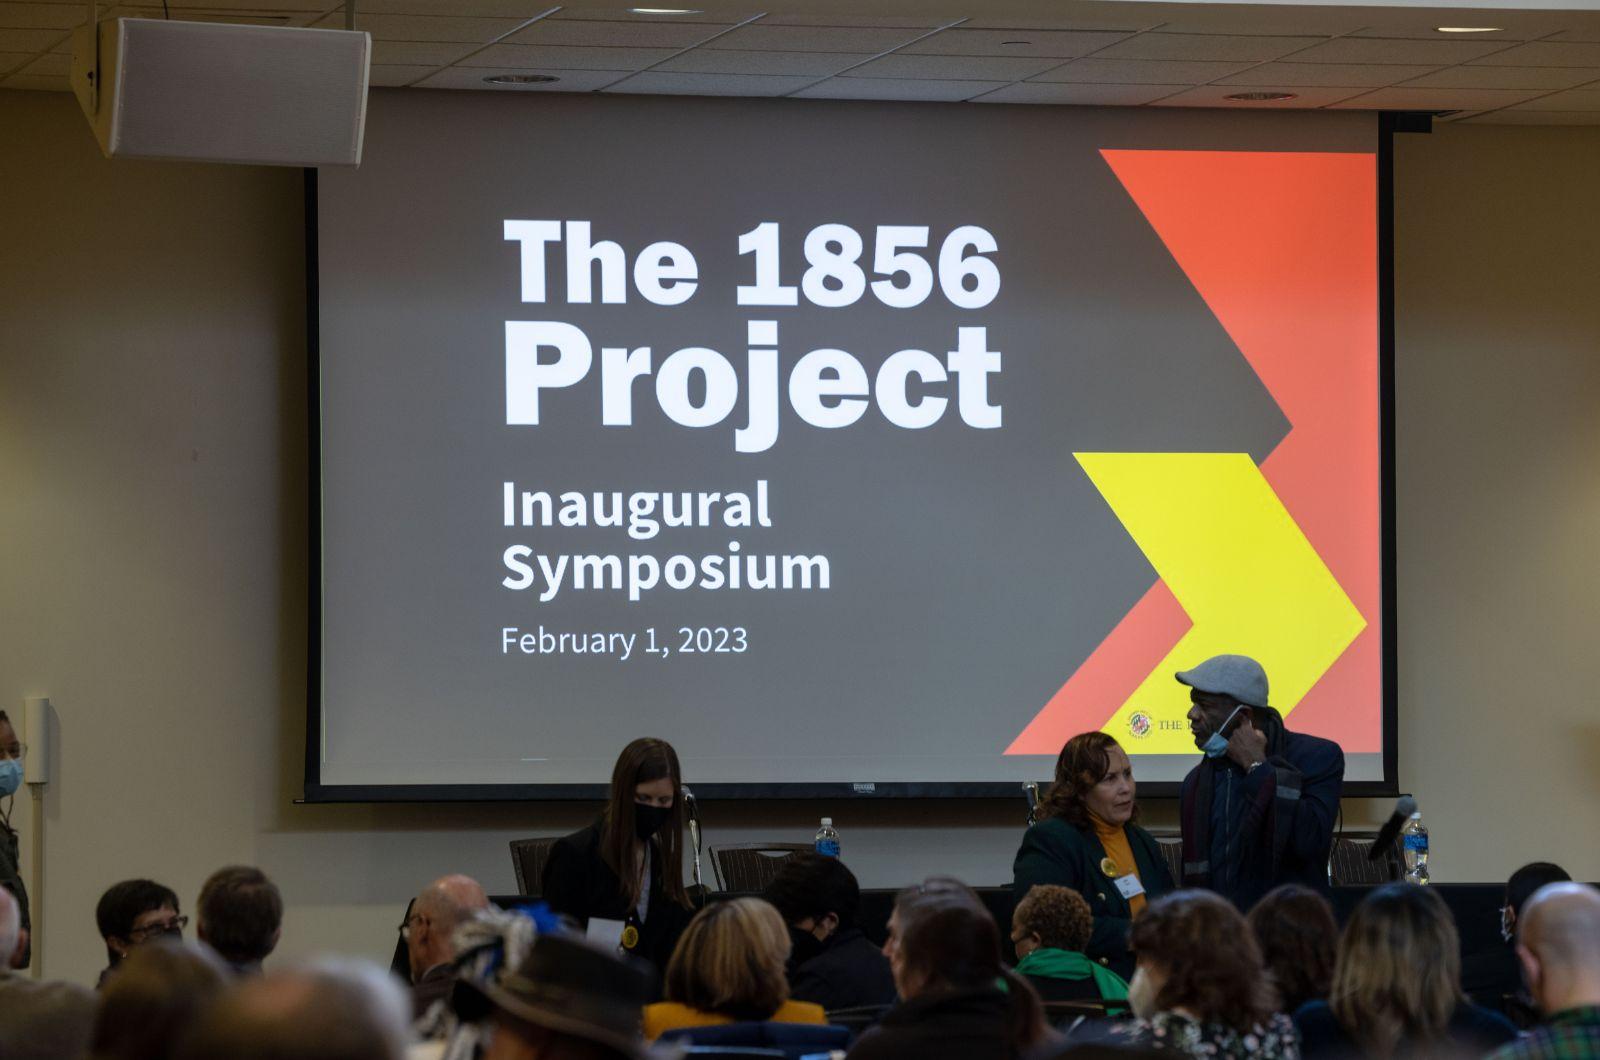 The 1856 Project Inaugural Symposium title slide